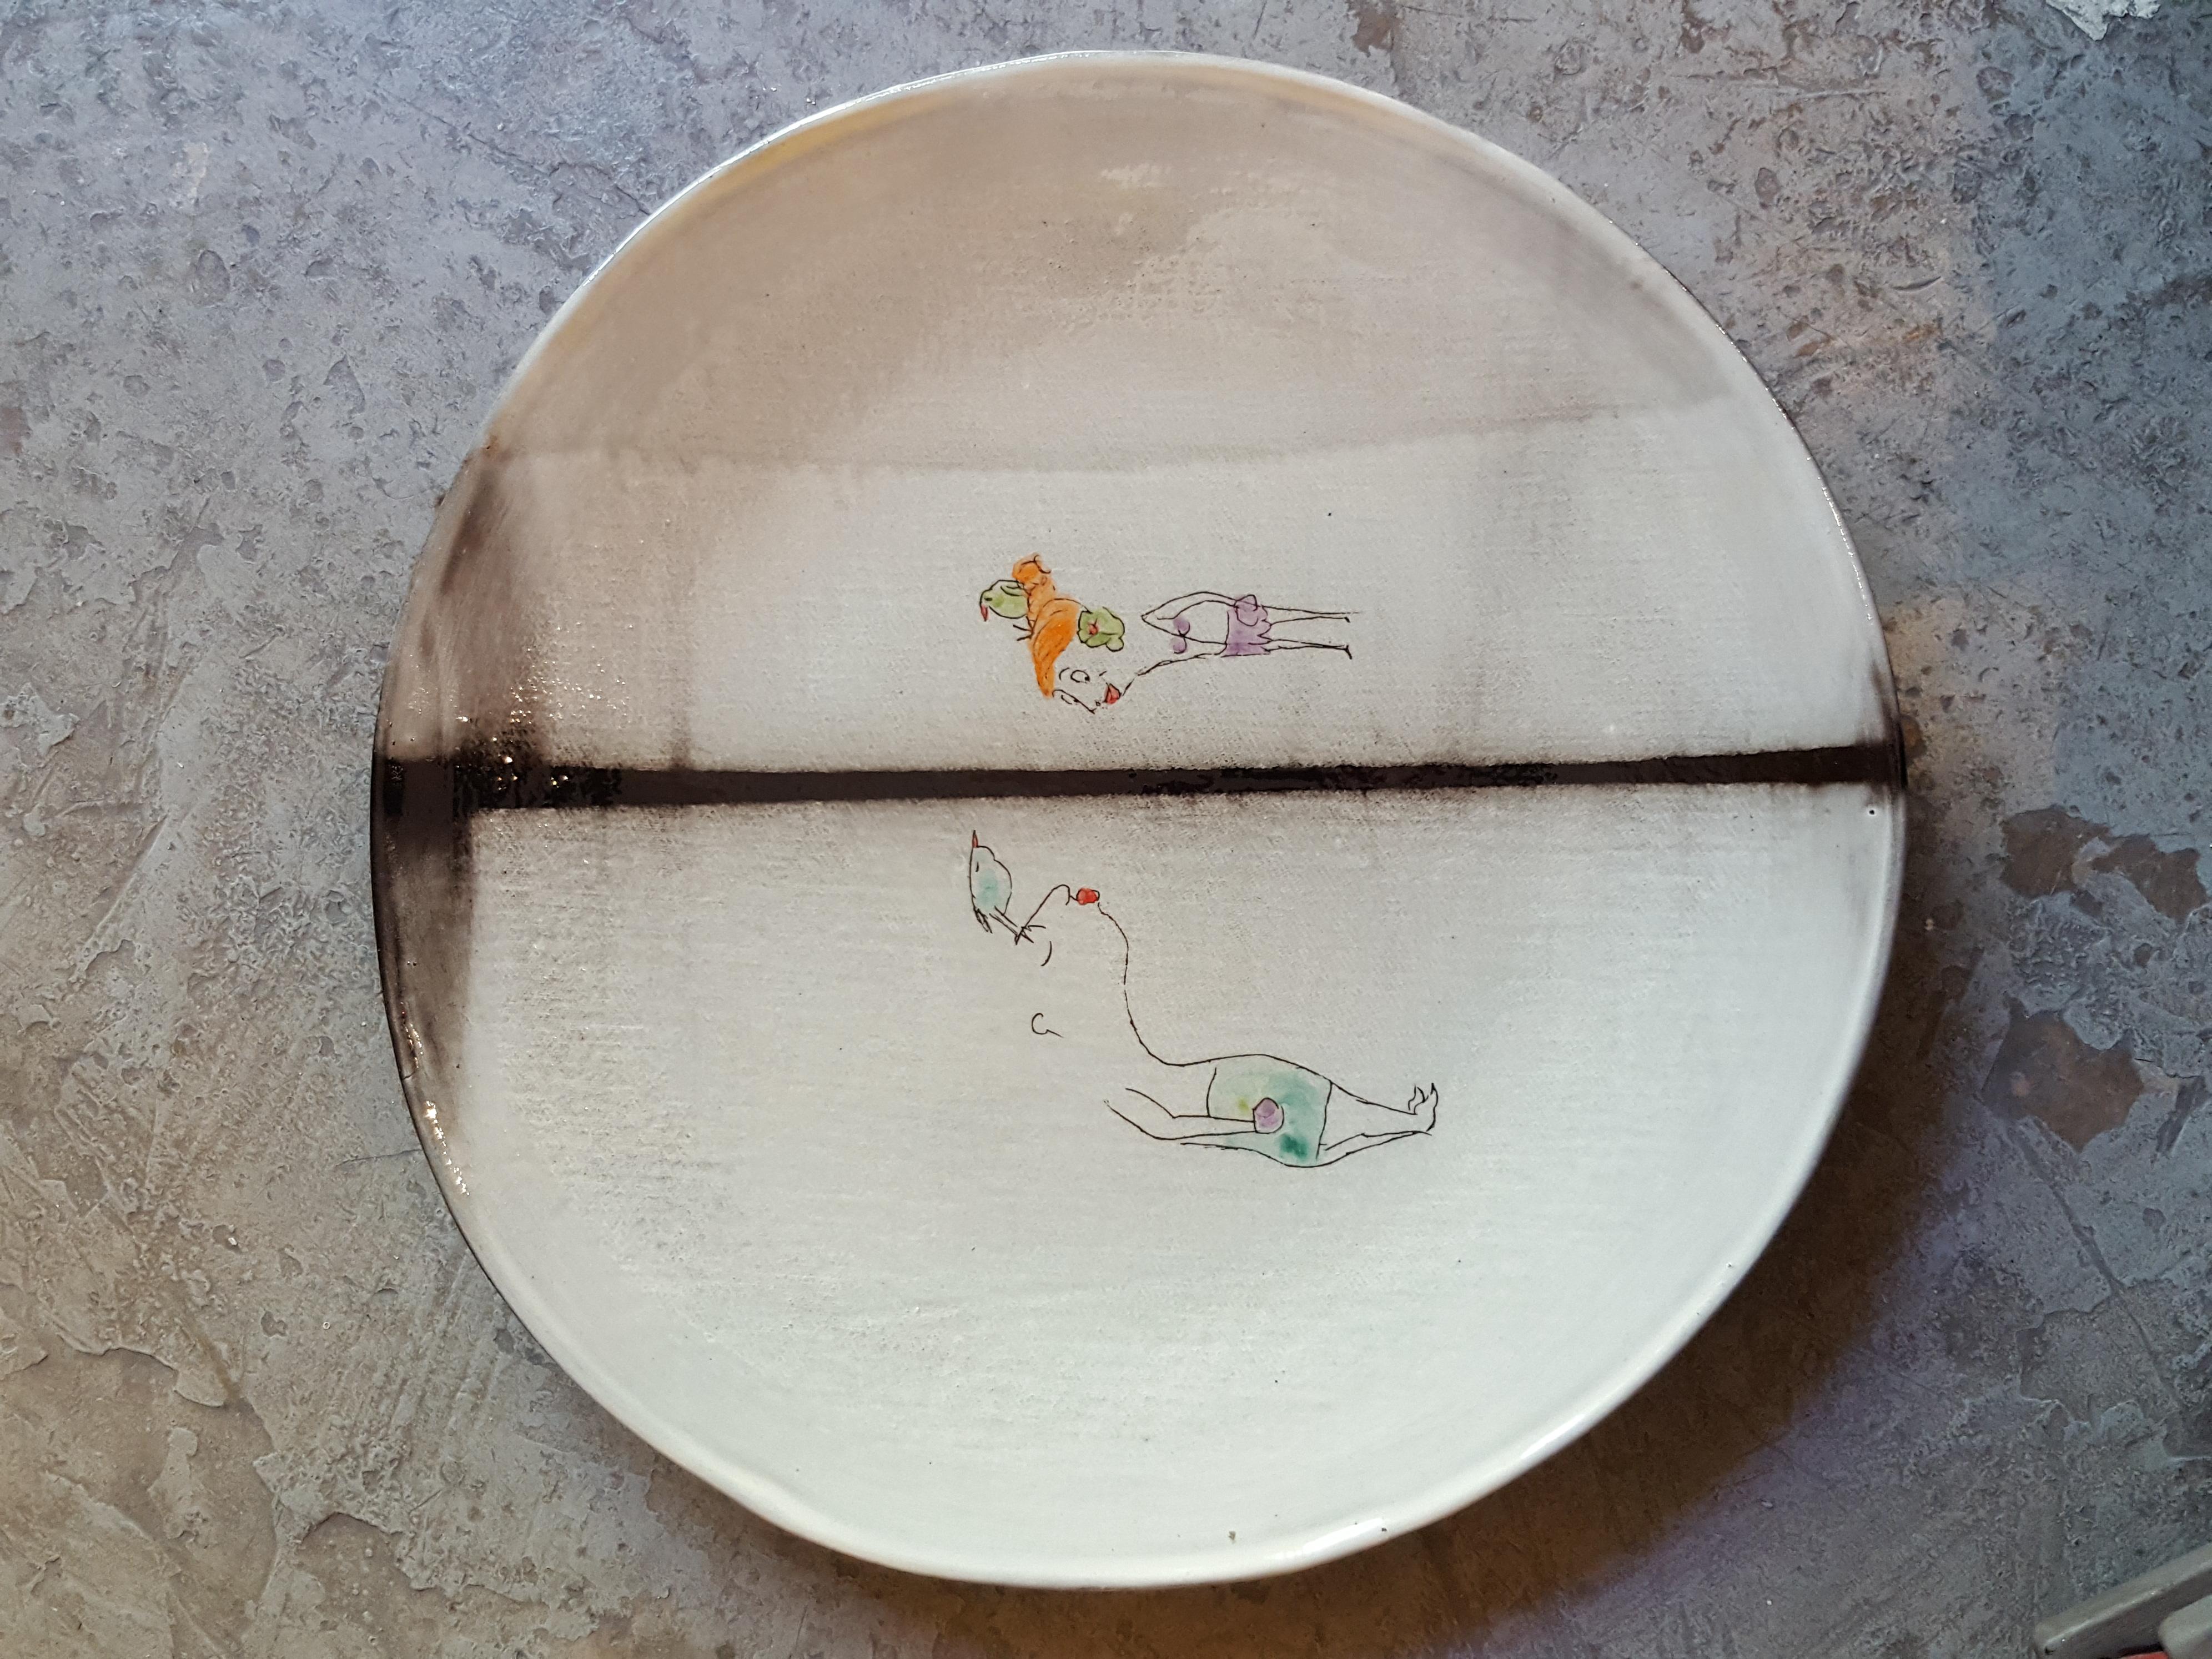 Ceramic earthenware Faience dinner soup plate artist creation, all handmade in France. Or beautifully as wall decoration as well.
Using plaques of dark Faience, graffiti, paint and enamel.
Decoration hand-painted with the artist's creative poetic